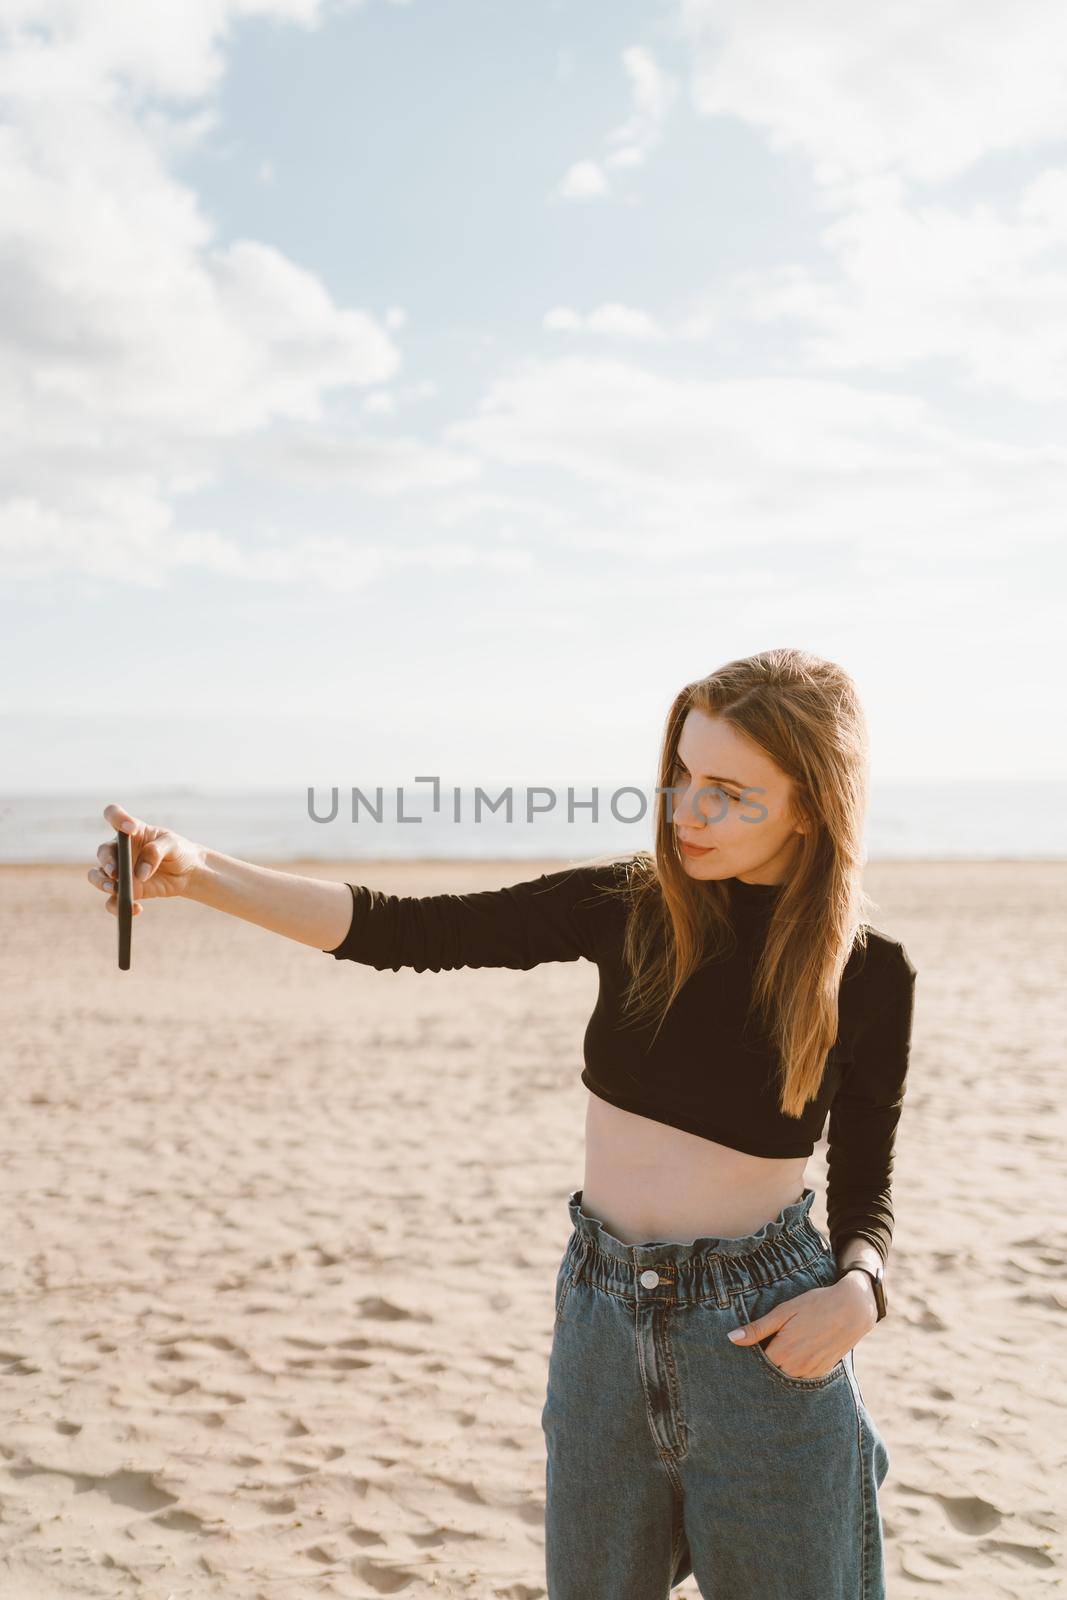 Pretty female with long hair, blonde takes photo on mobile phone on sandy beach in summer by NataBene